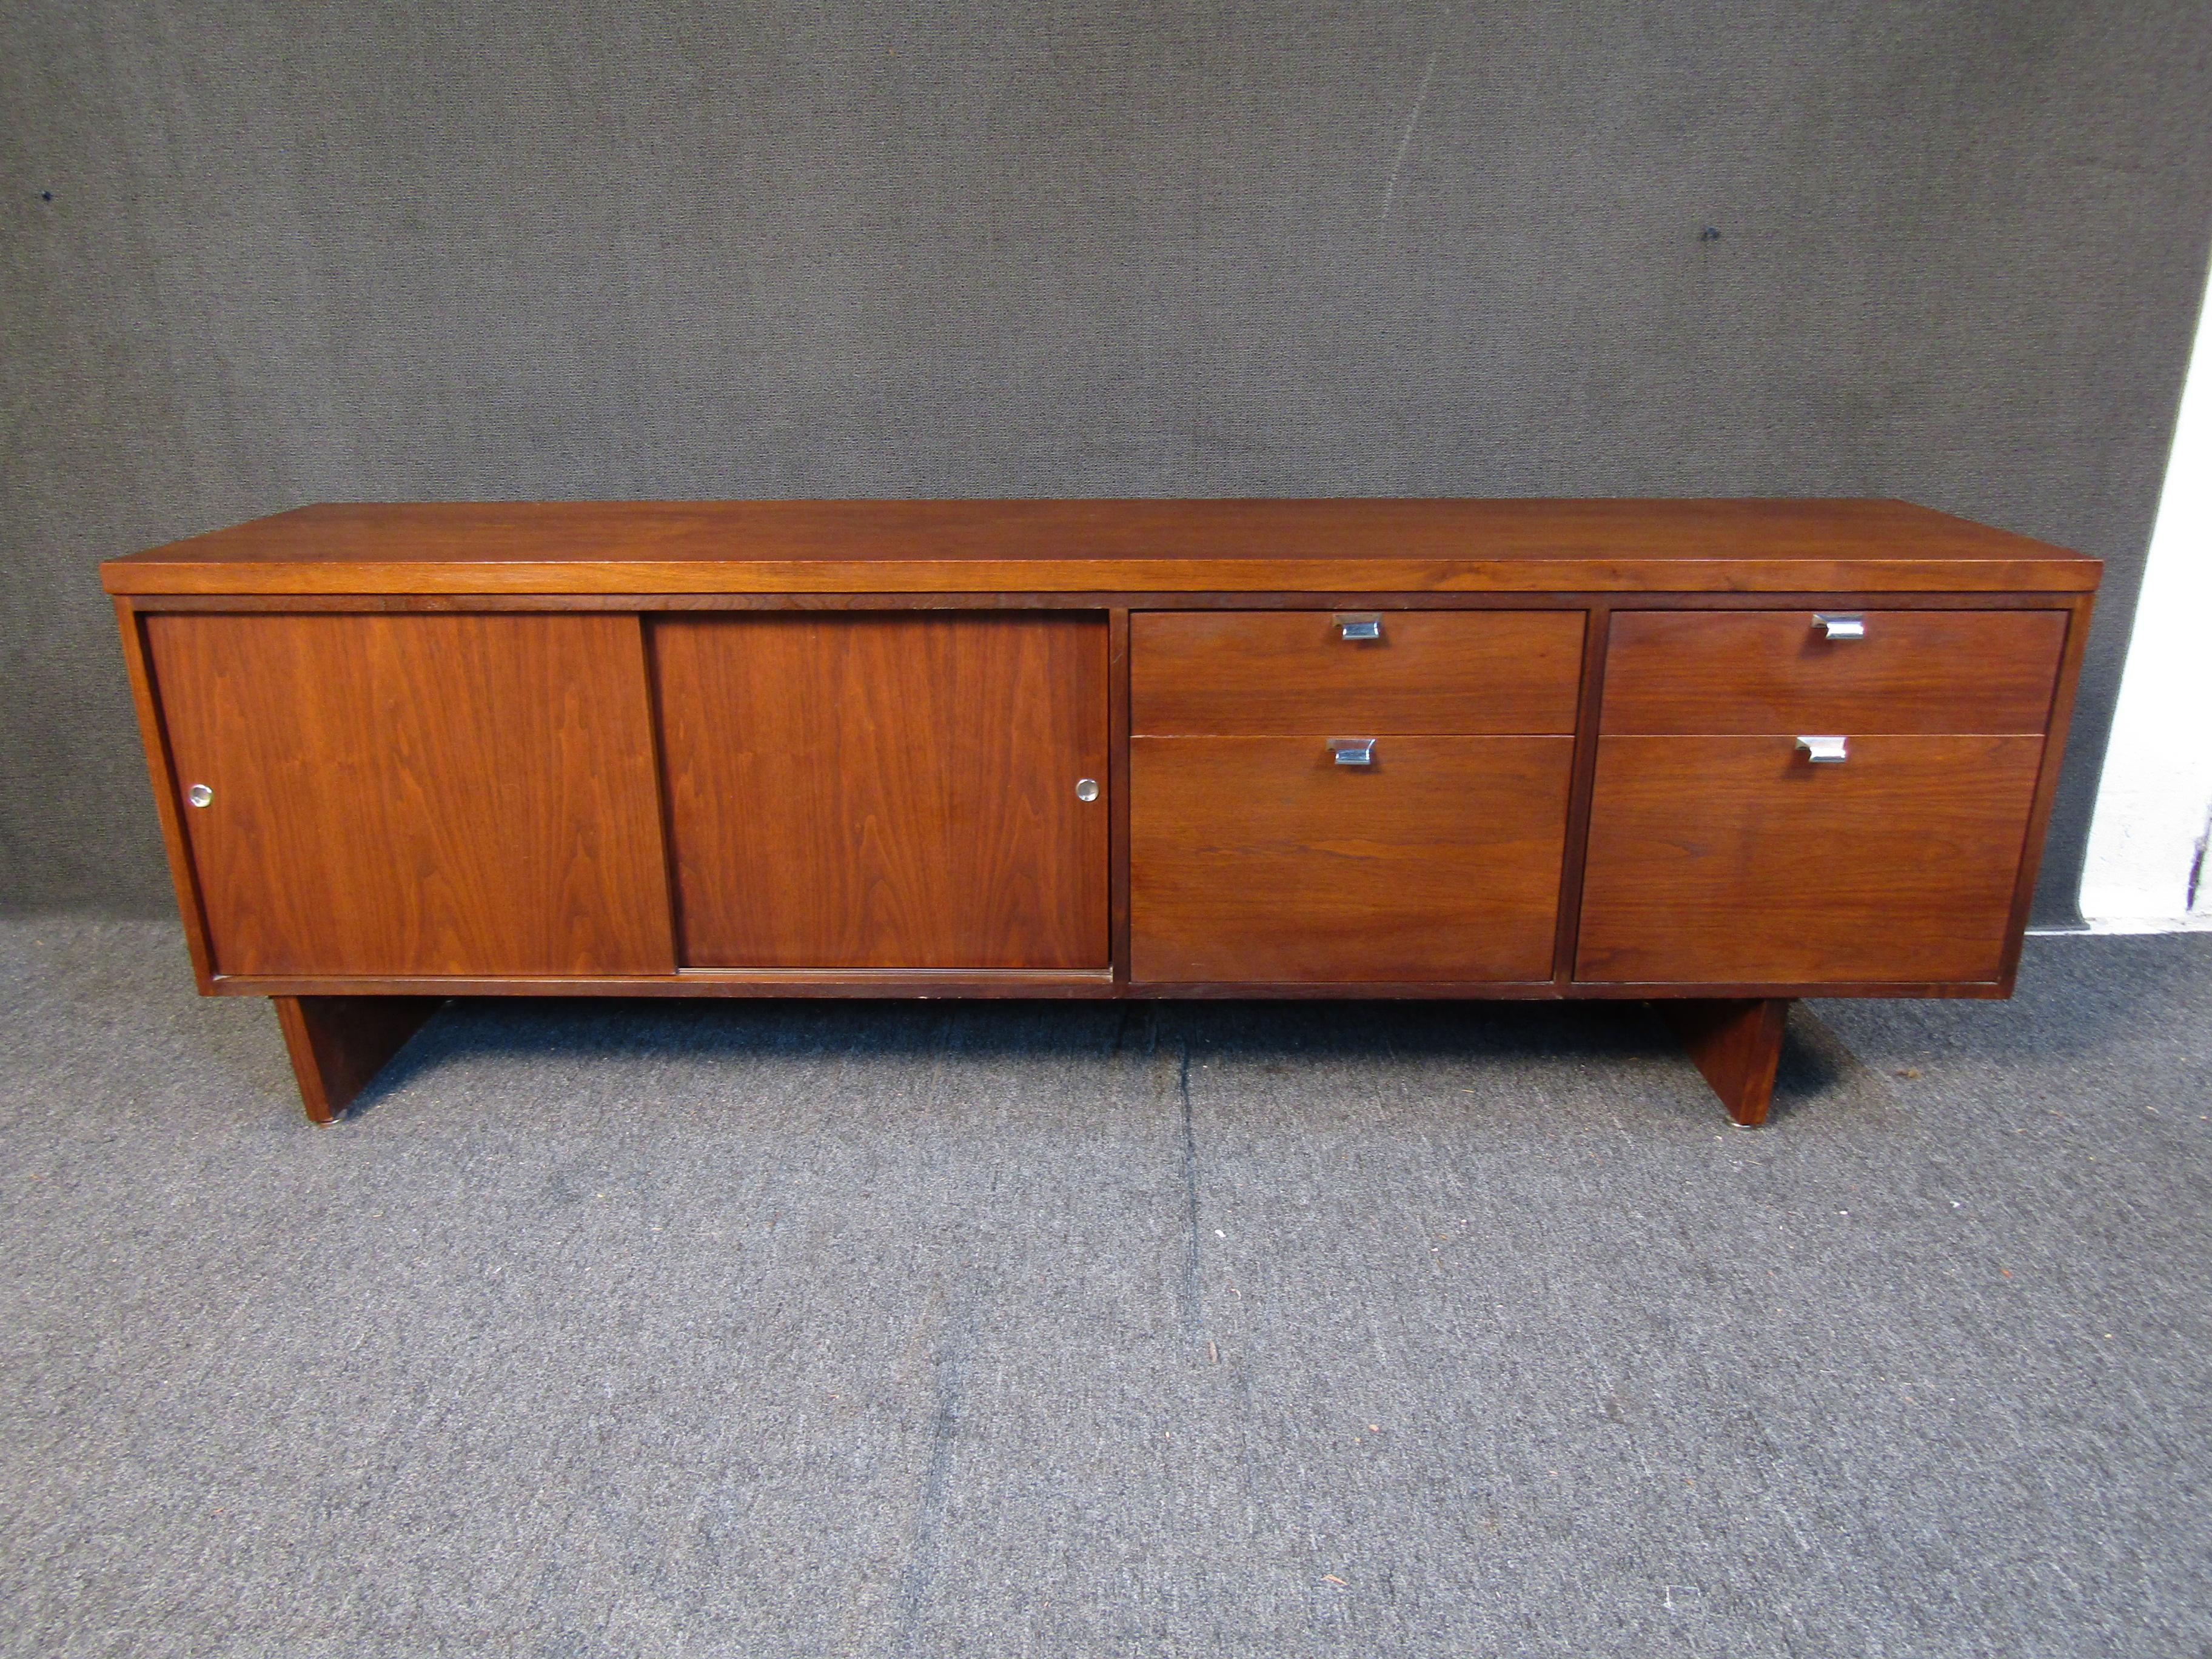 A Mid-Century Modern walnut finish credenza featuring adequate storage space and long one piece legs. The credenza also features a sliding door covering a two-tier shelving unit and 4 drawers to the right. Please confirm item location with seller